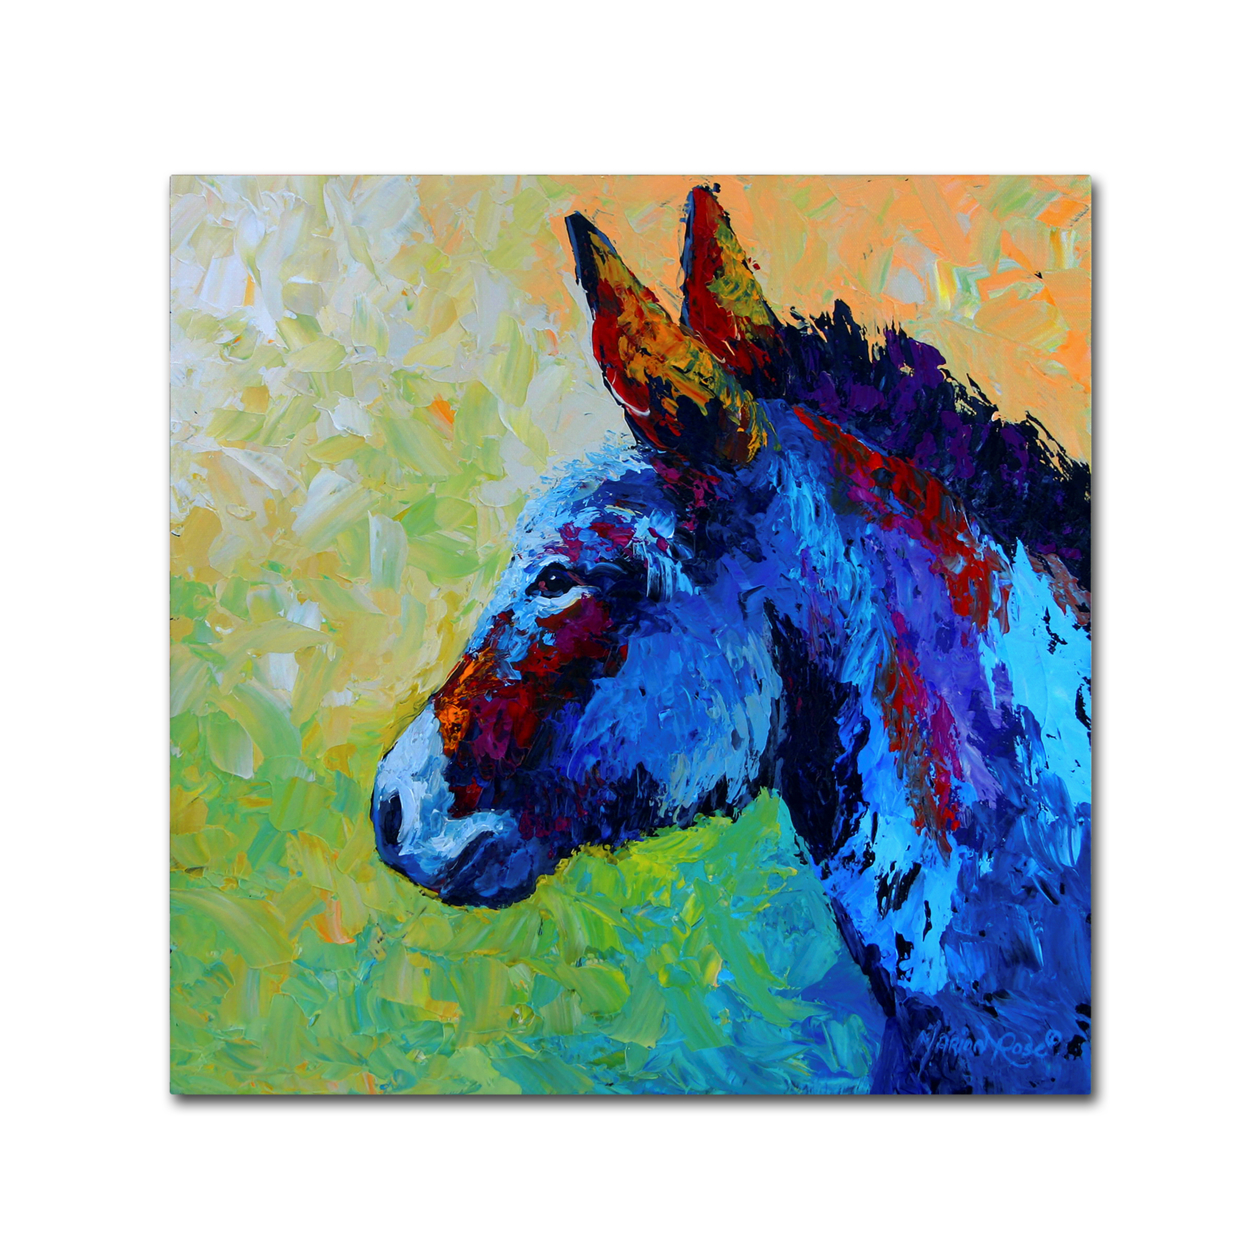 Marion Rose 'Burro' Ready To Hang Canvas Art 35 X 35 Inches Made In USA